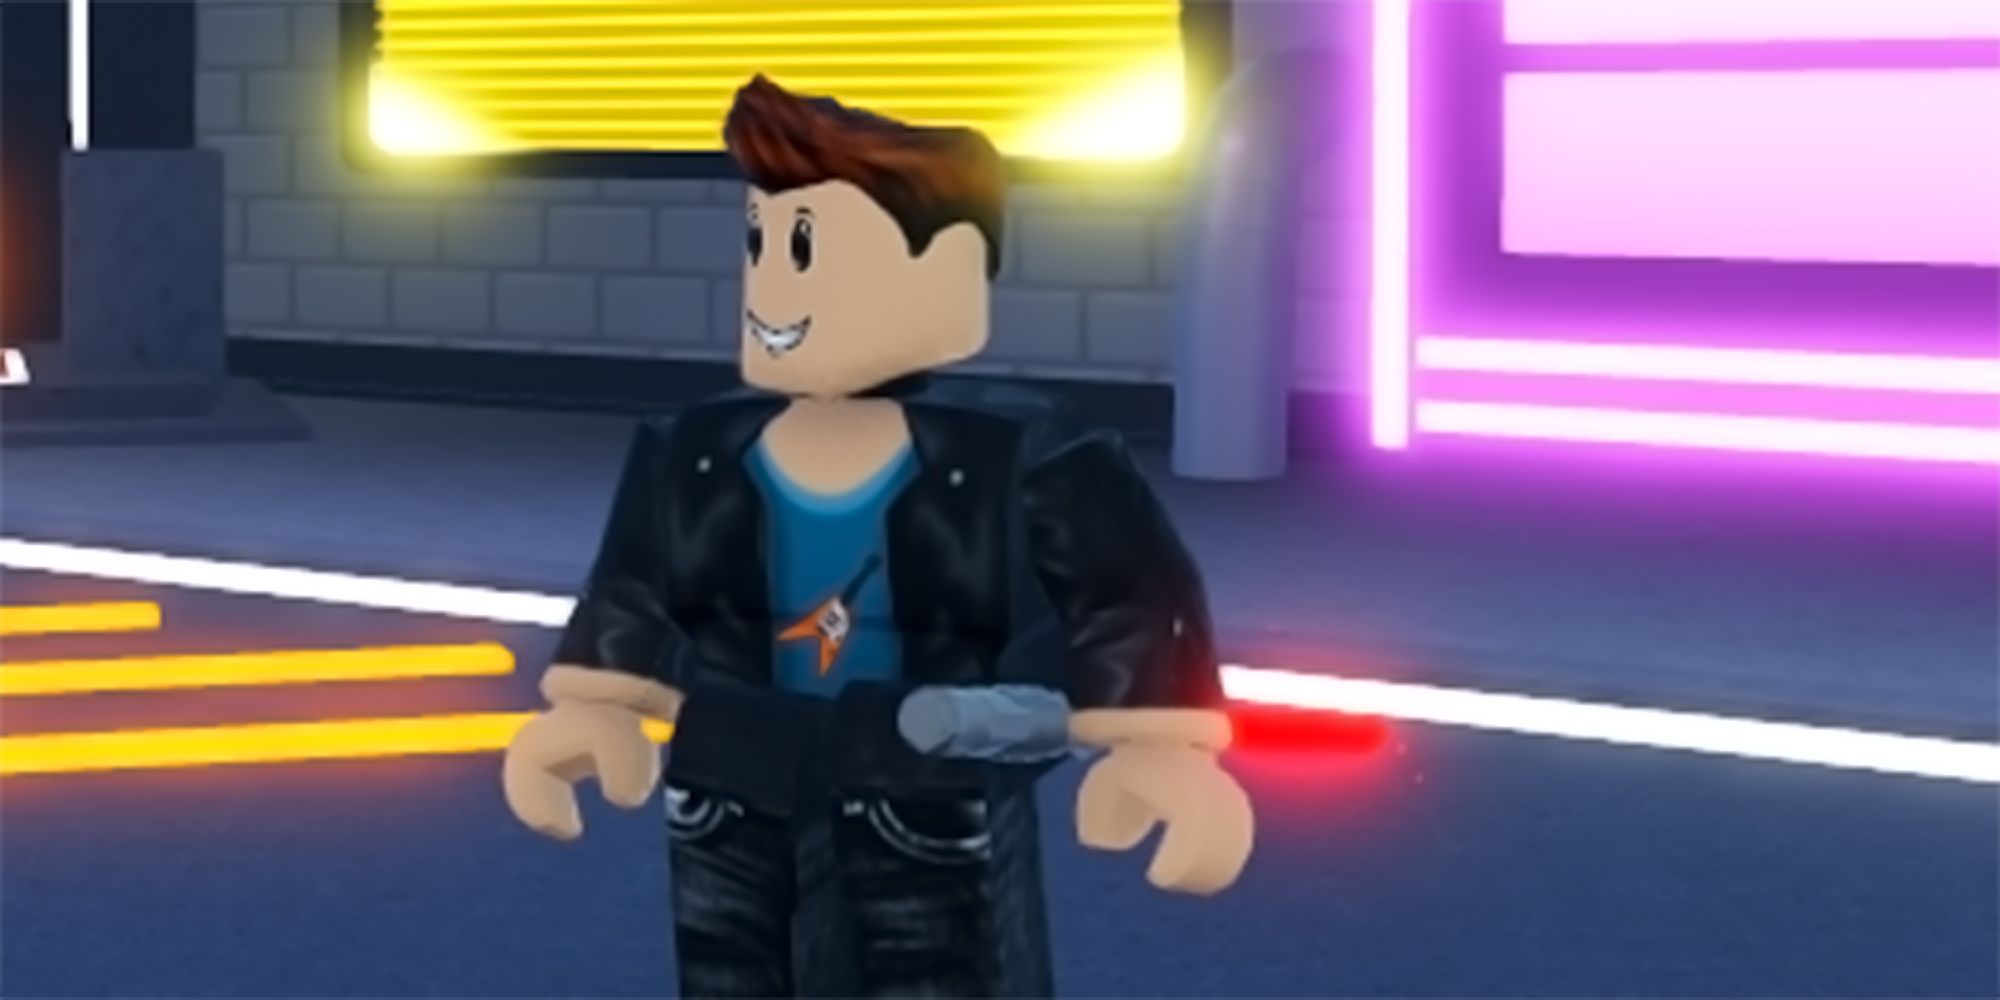 A Roblox character stands inside a futuristic plaza while wielding a red light saber in Phantom Ball.